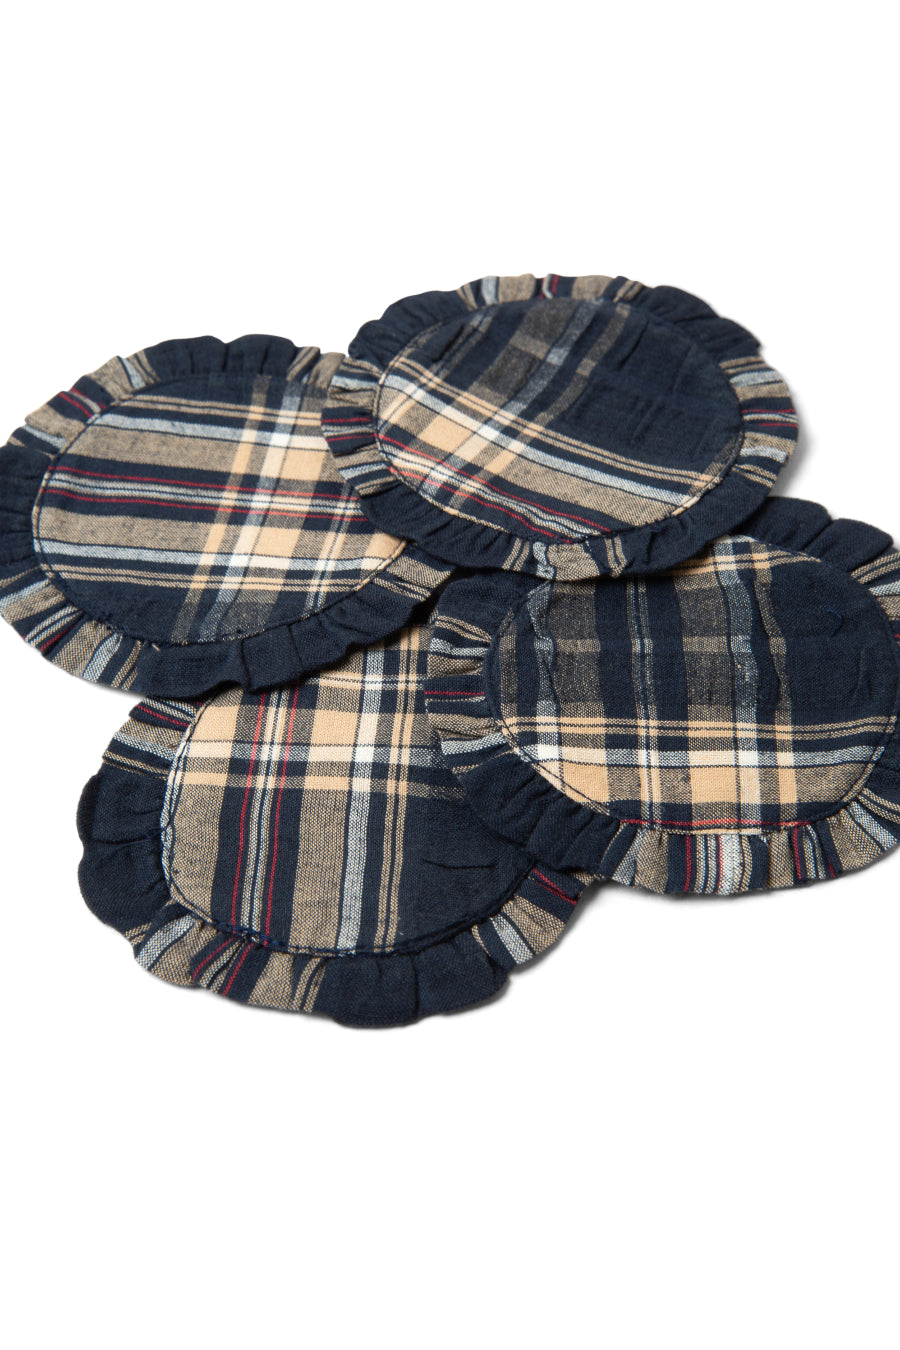 FRILL COASTER SET OF 4 IN CHECK